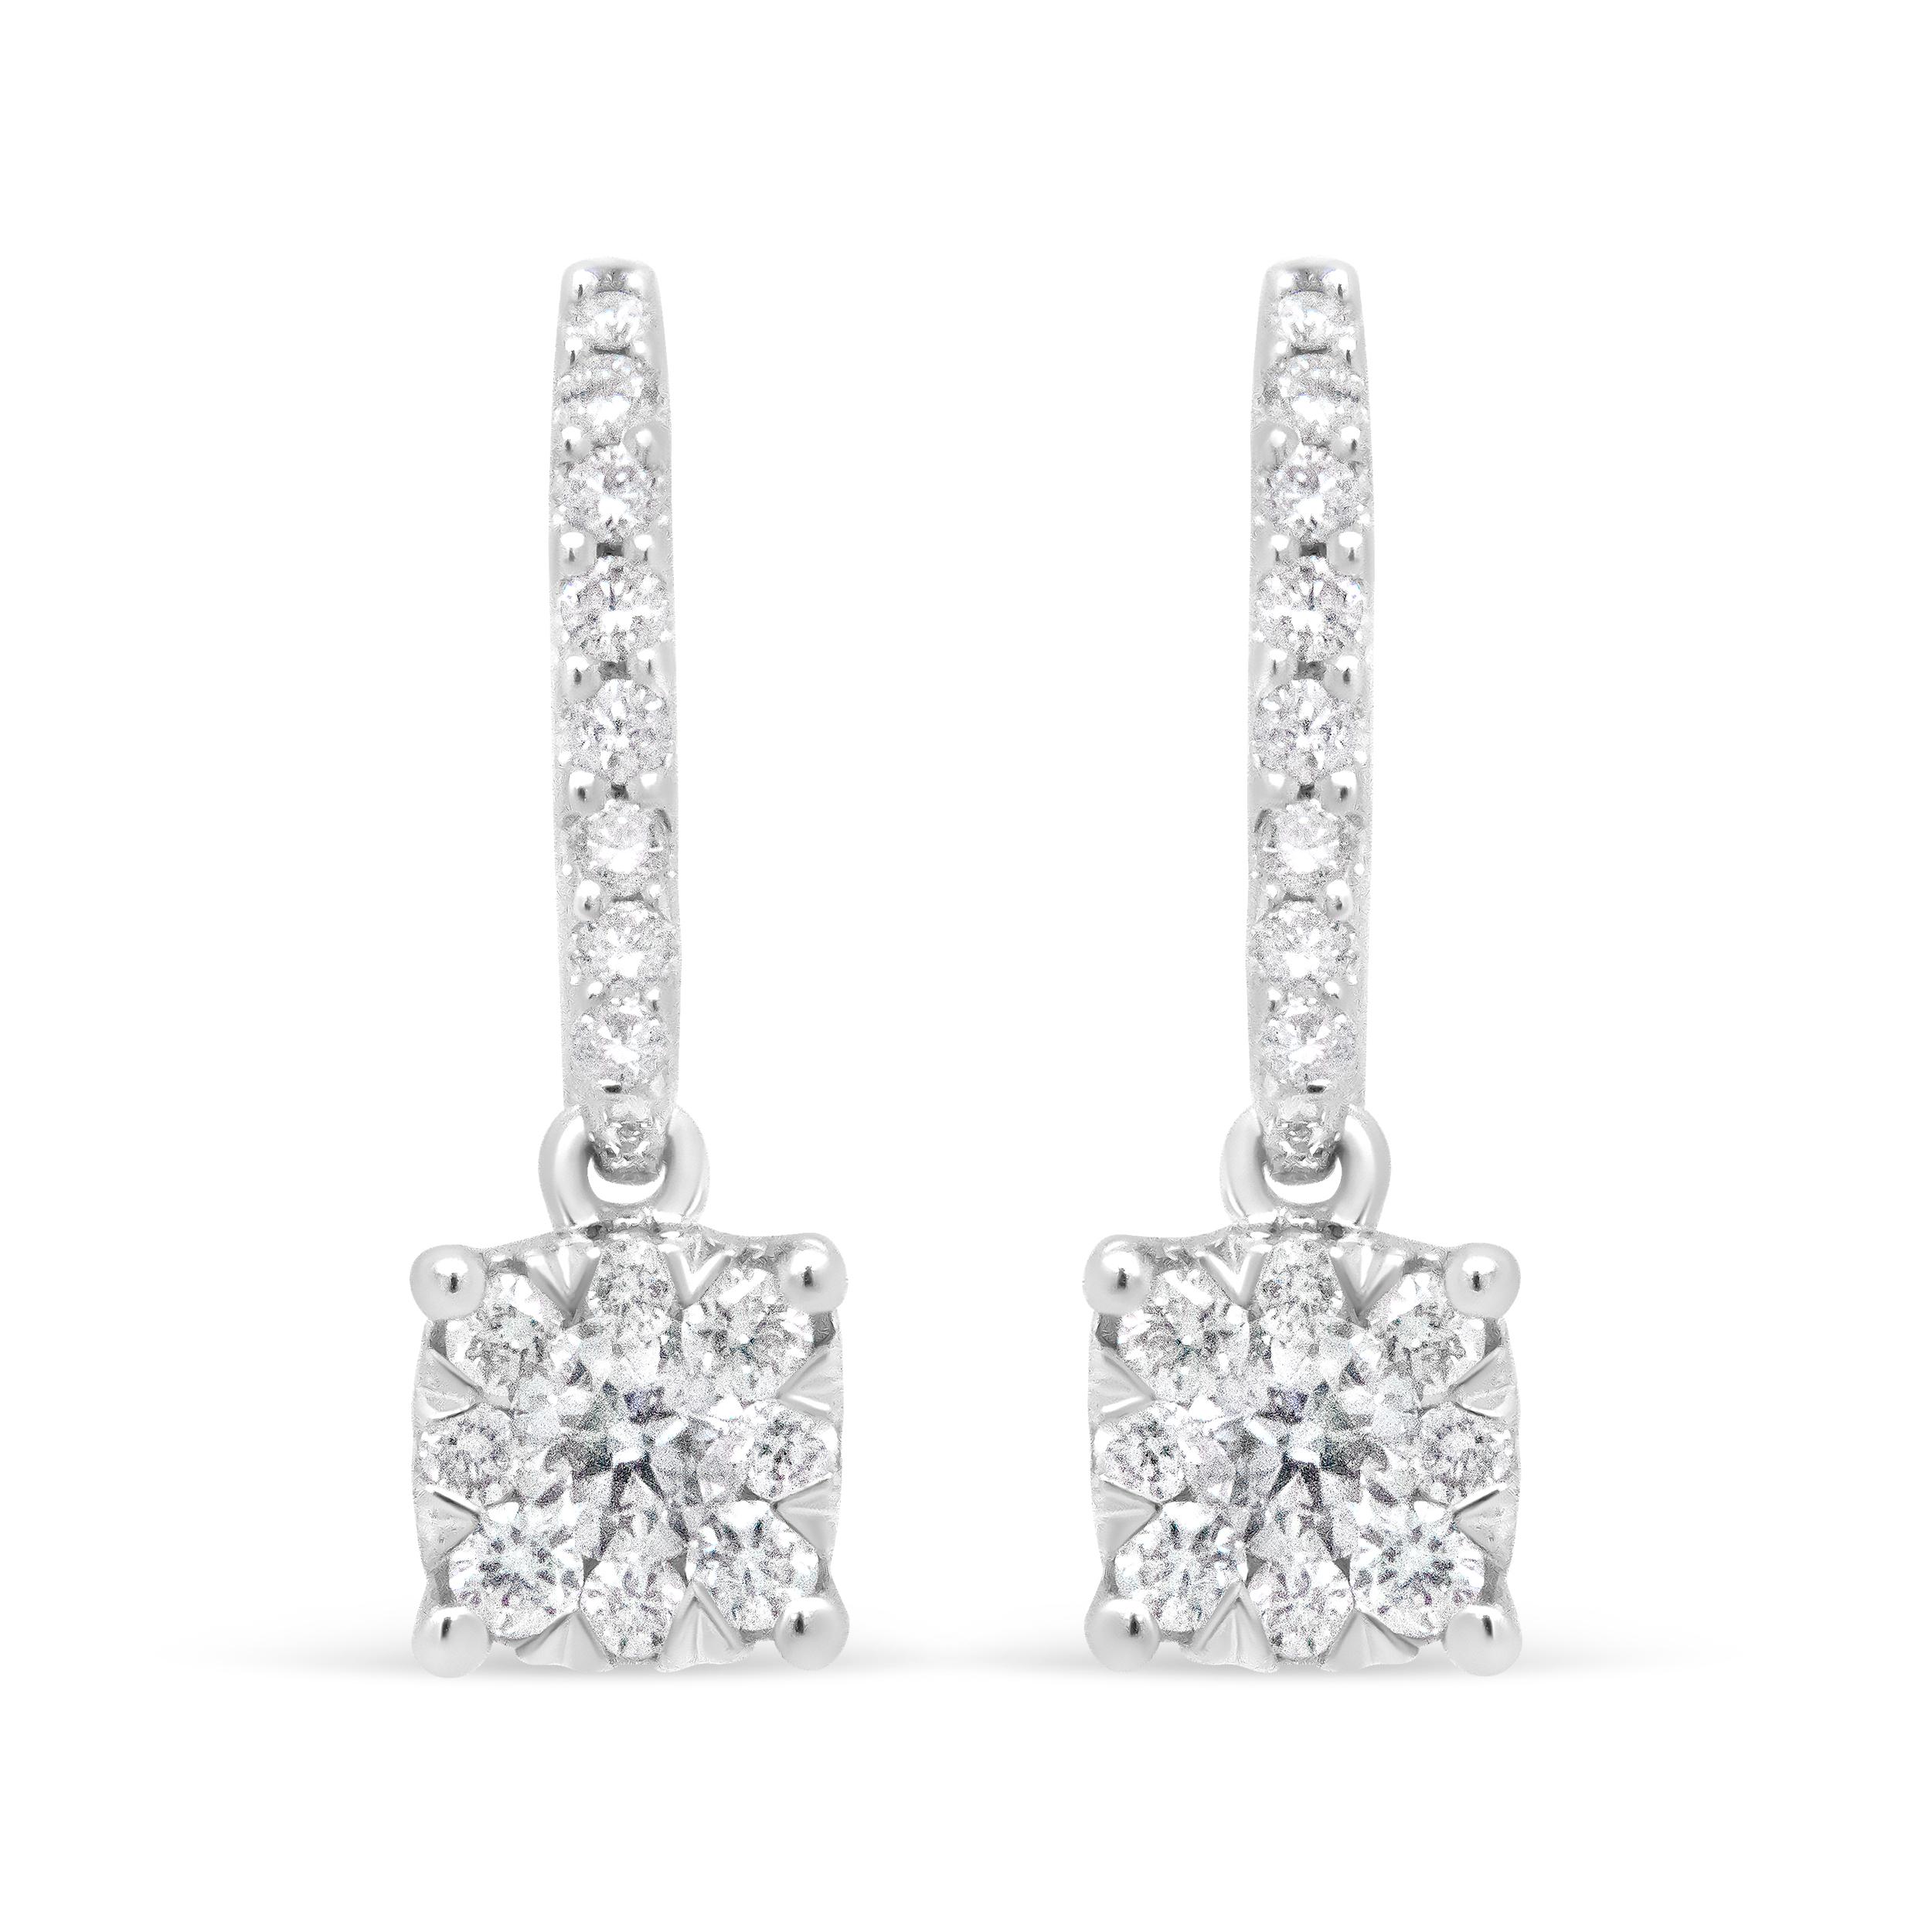 Sparkle is the name of the game for this pair of diamond dangle hook earring. A cascade of round, prong-set diamonds spill downward toward a central white diamond cradled in a pave setting and surrounded by a halo of round, prong-set diamonds. The